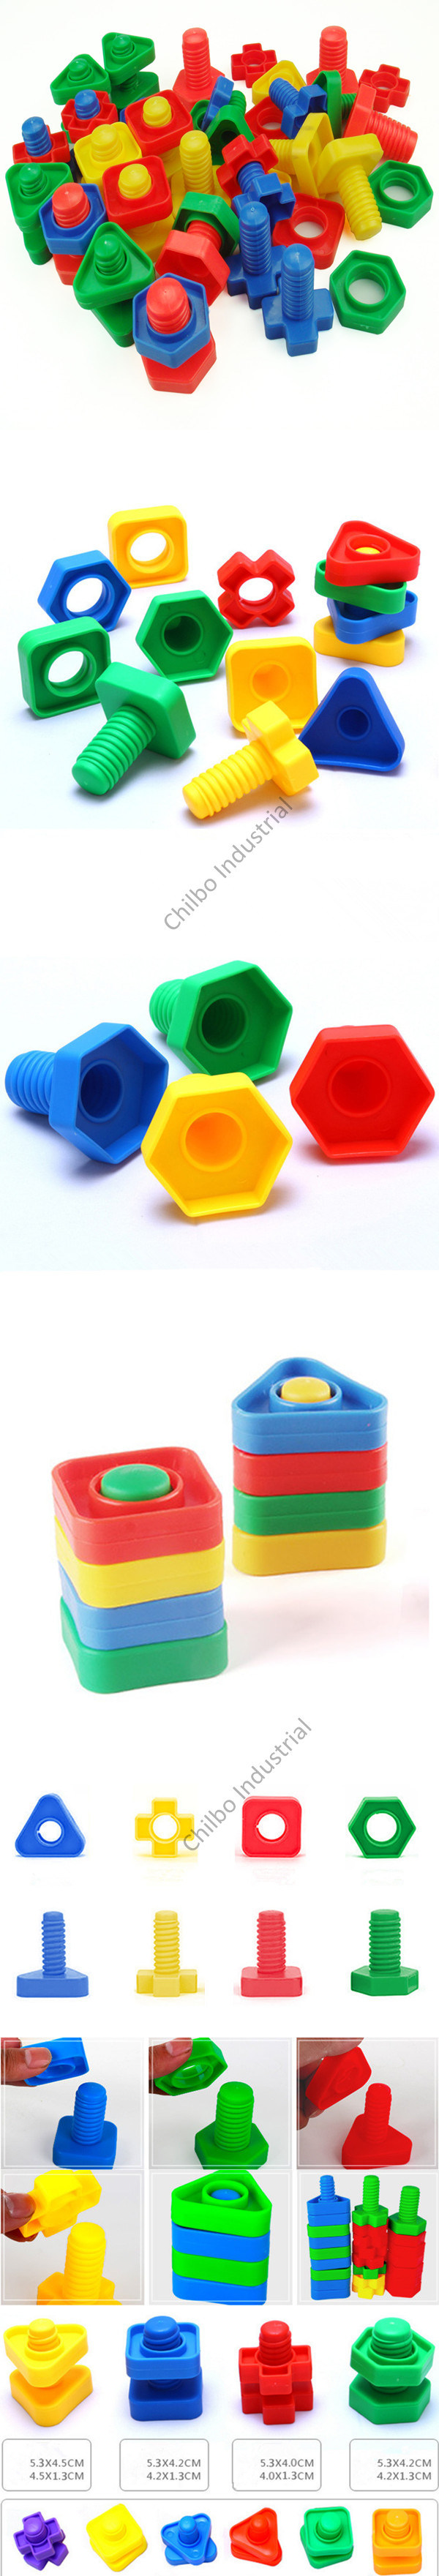 Plastic Bolts and Nuts Building Blocks for Children Toys